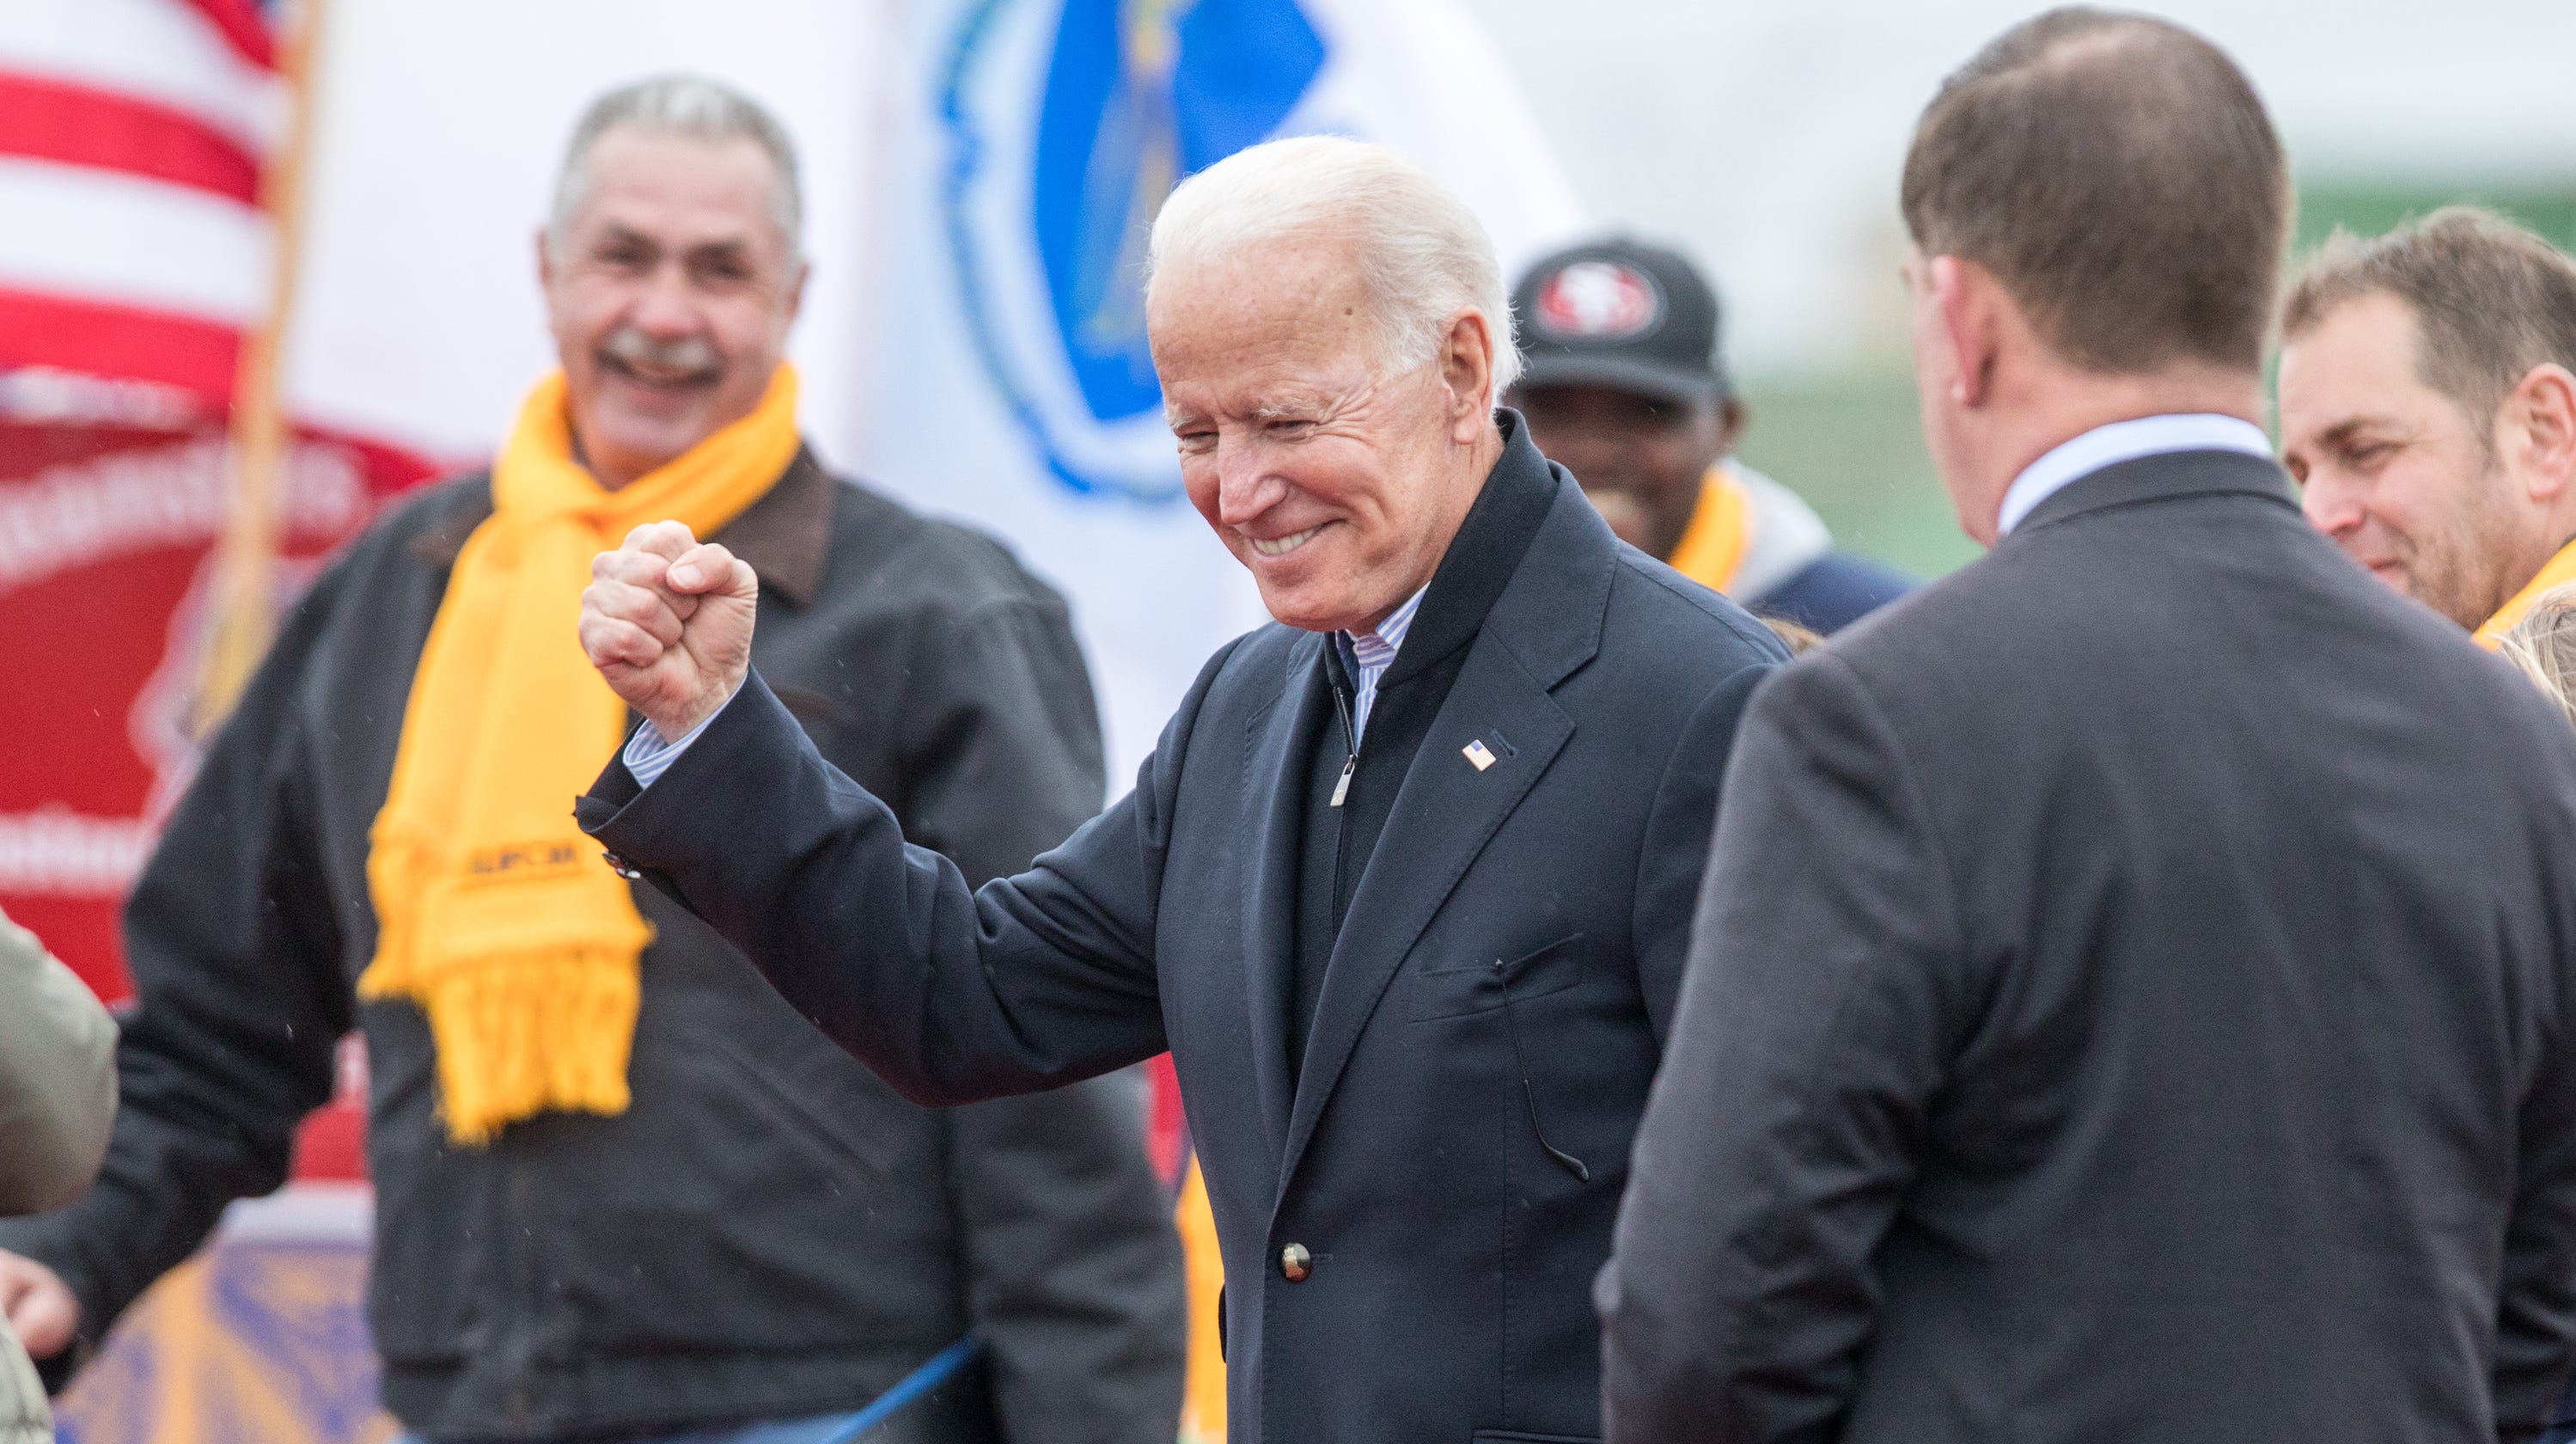 Joe Biden 2020 campaign: Here are the other Democrats running